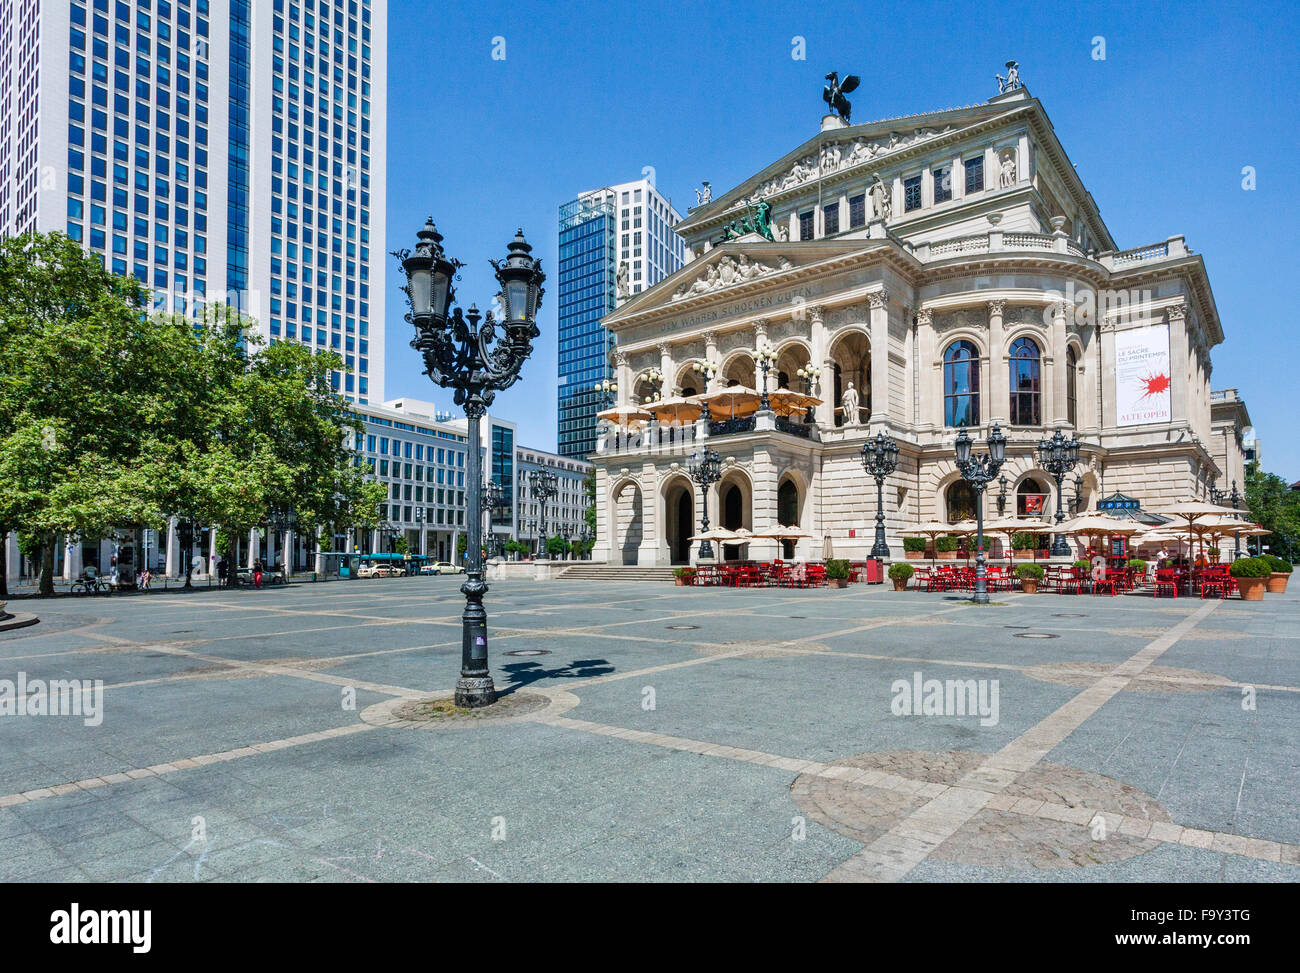 Germany, Hesse, Frankfurt am Main, Opera Square with view of the Old Opera, Alte Oper Stock Photo